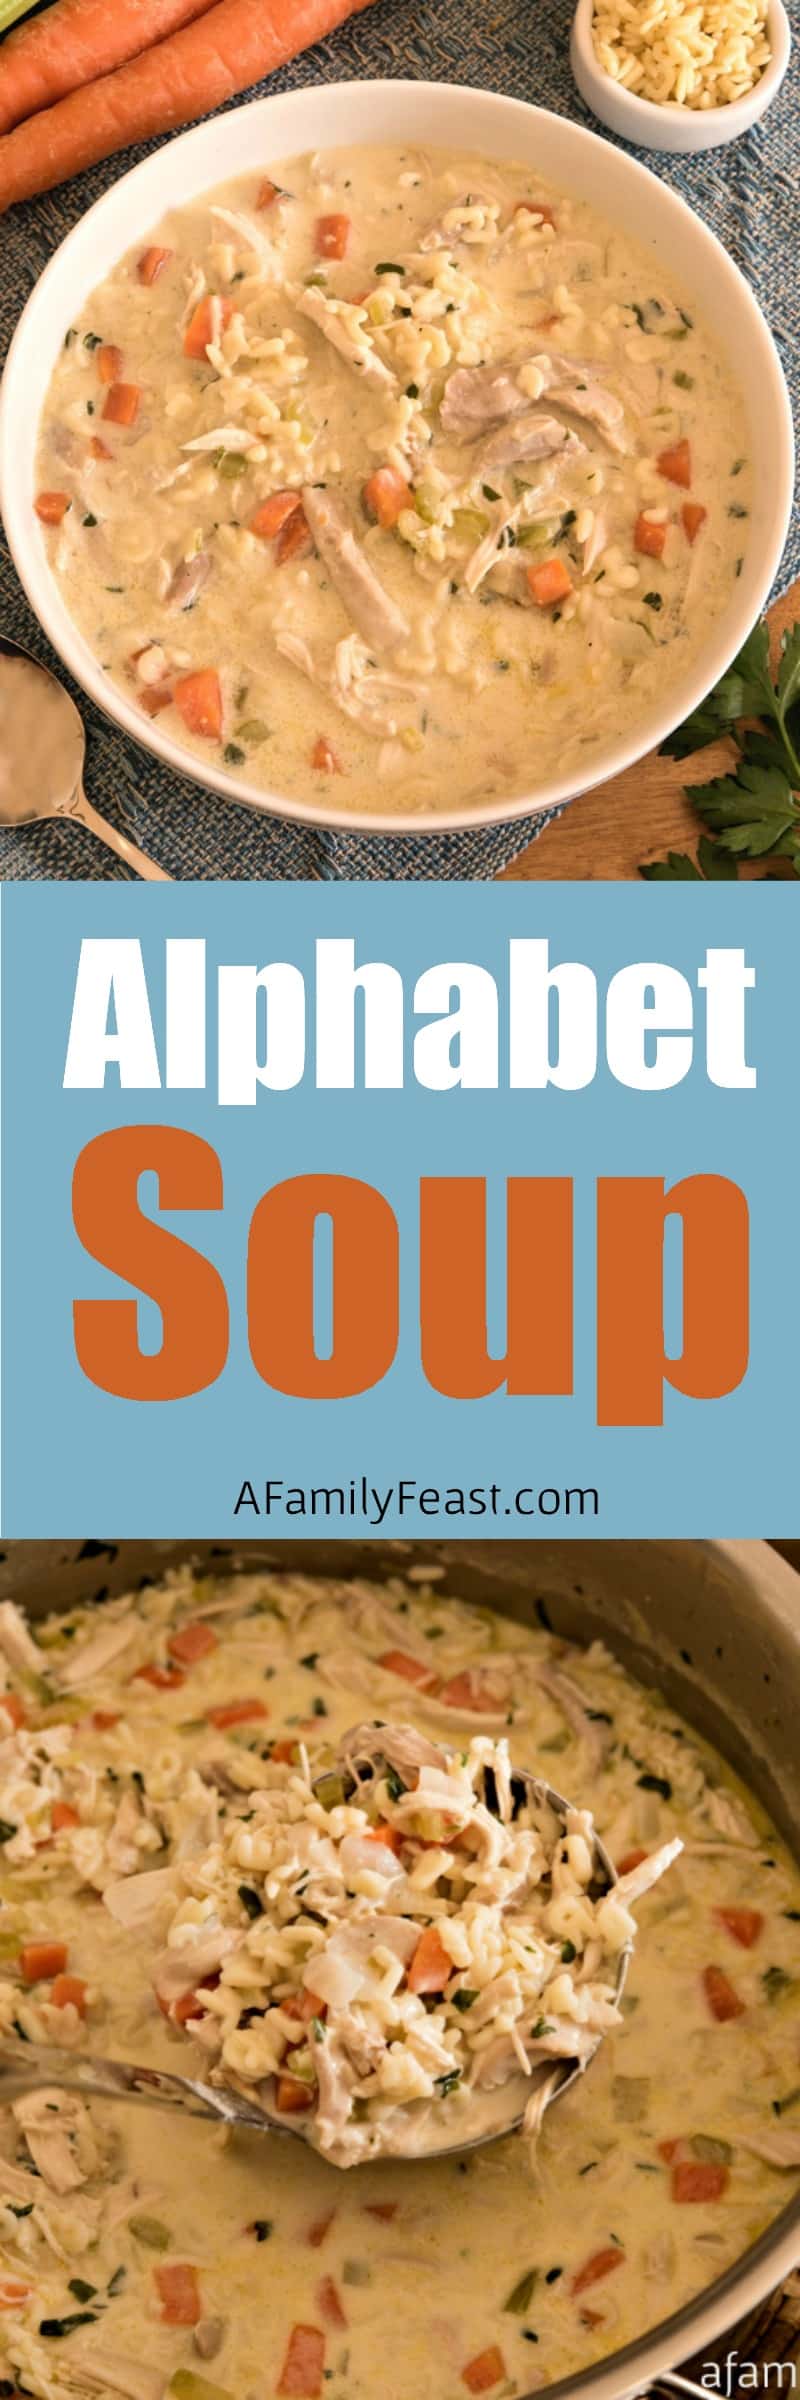 This creamy, delicious Alphabet Soup cooks up in less than 30 minutes!